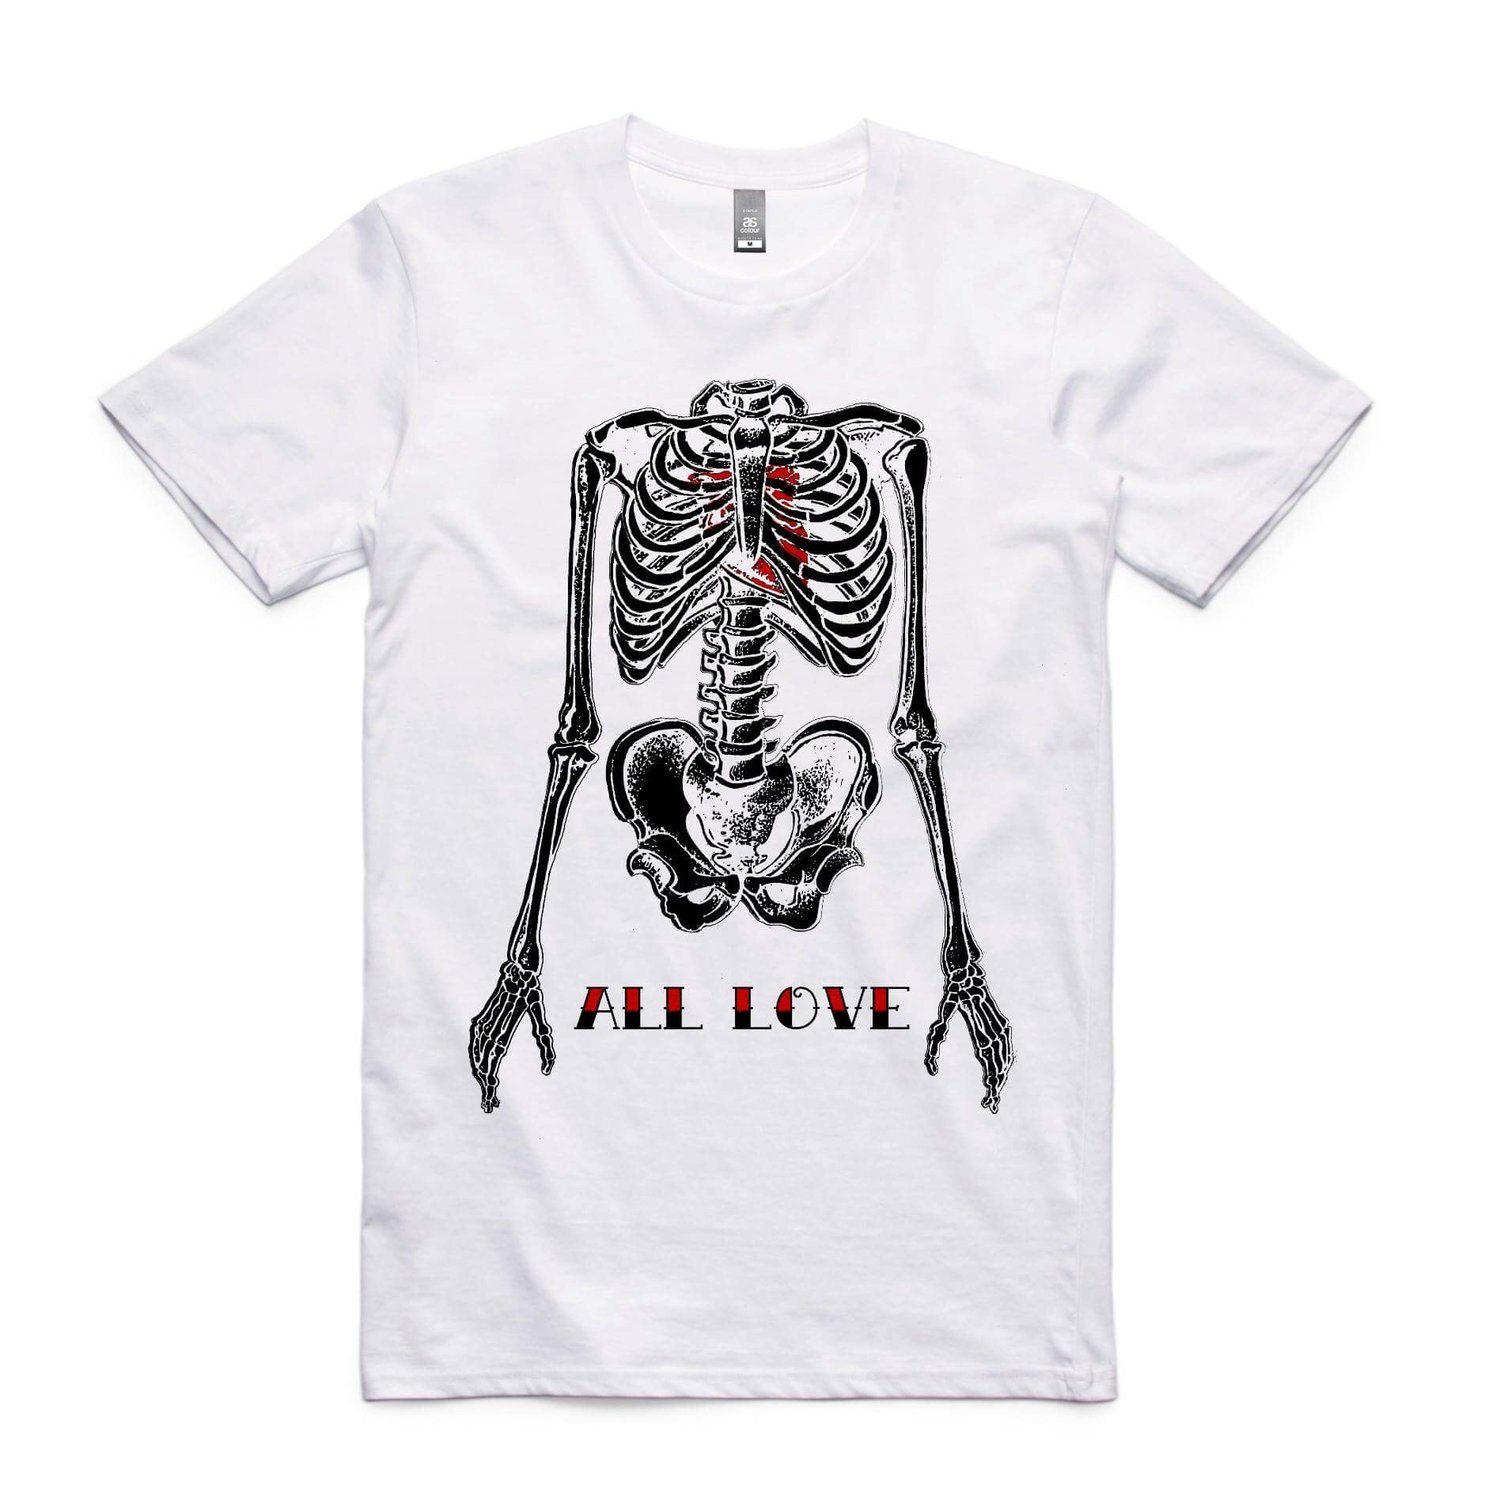 Image of All Love (white shirt)